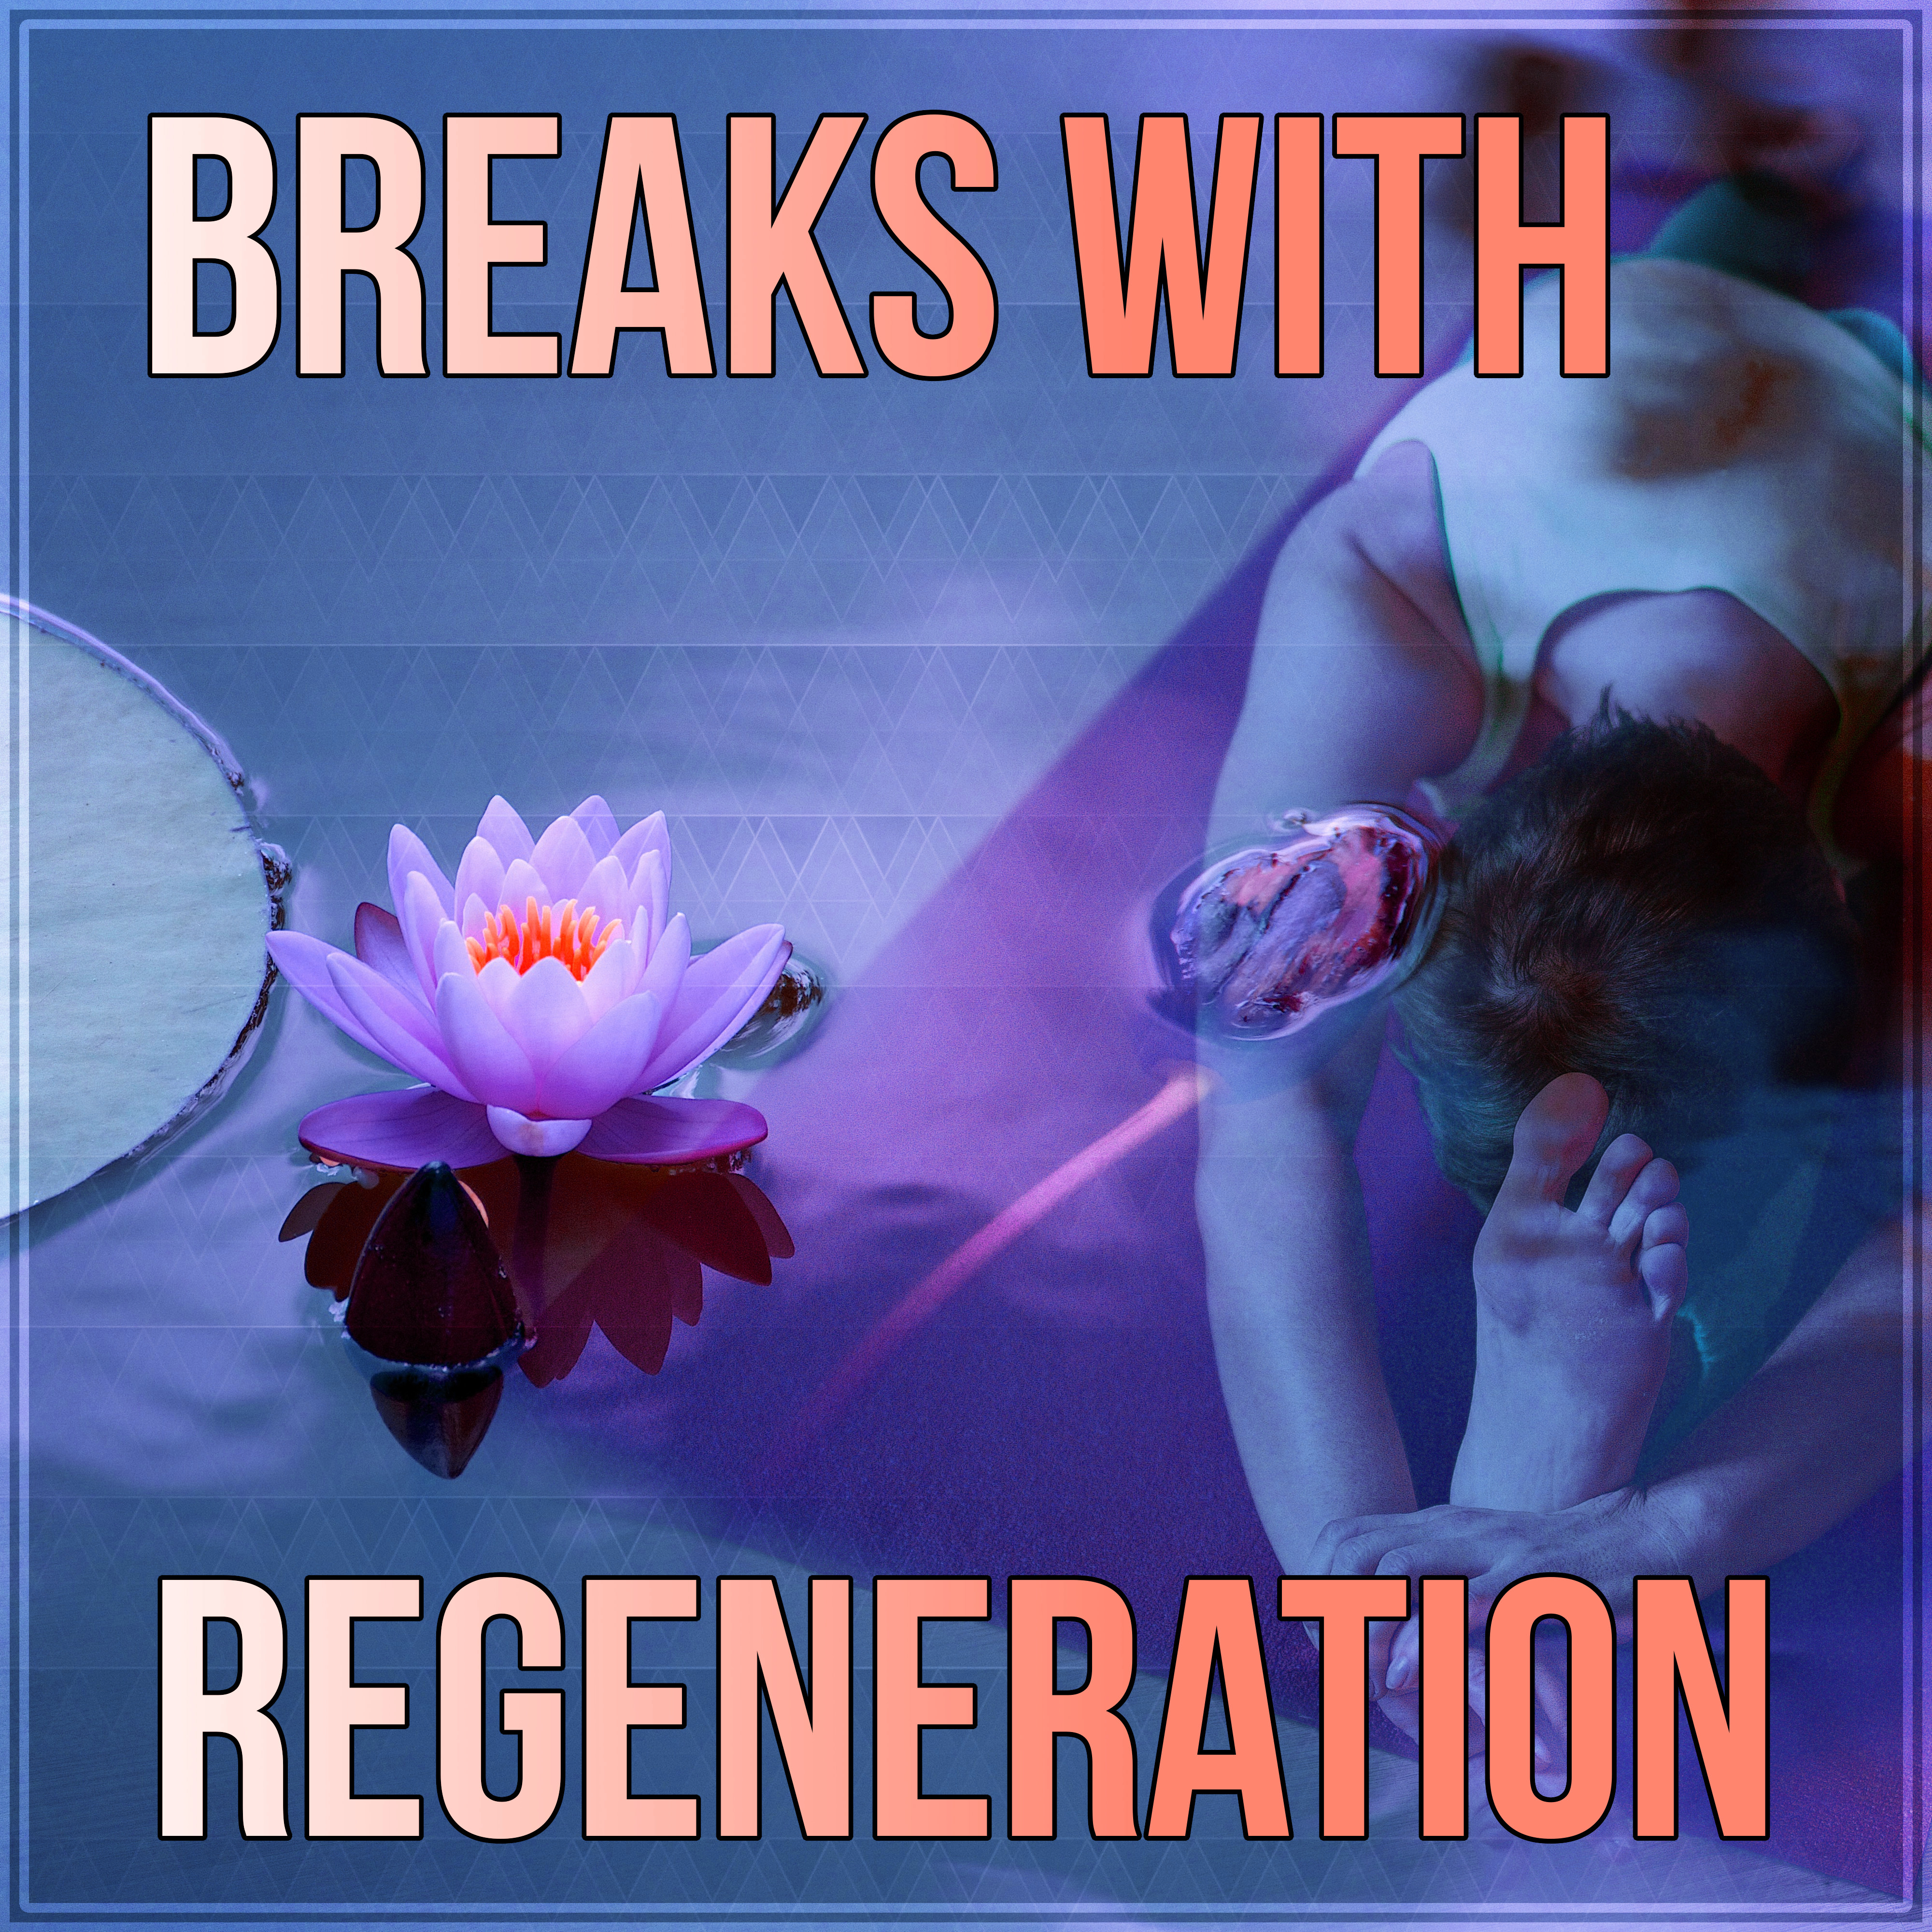 Breaks with Regeneration – Relaxing Music for Serenity, Tranquility Spa, Calm, Magnetic Moments with Nature Sounds, Om Chanting, Health Care